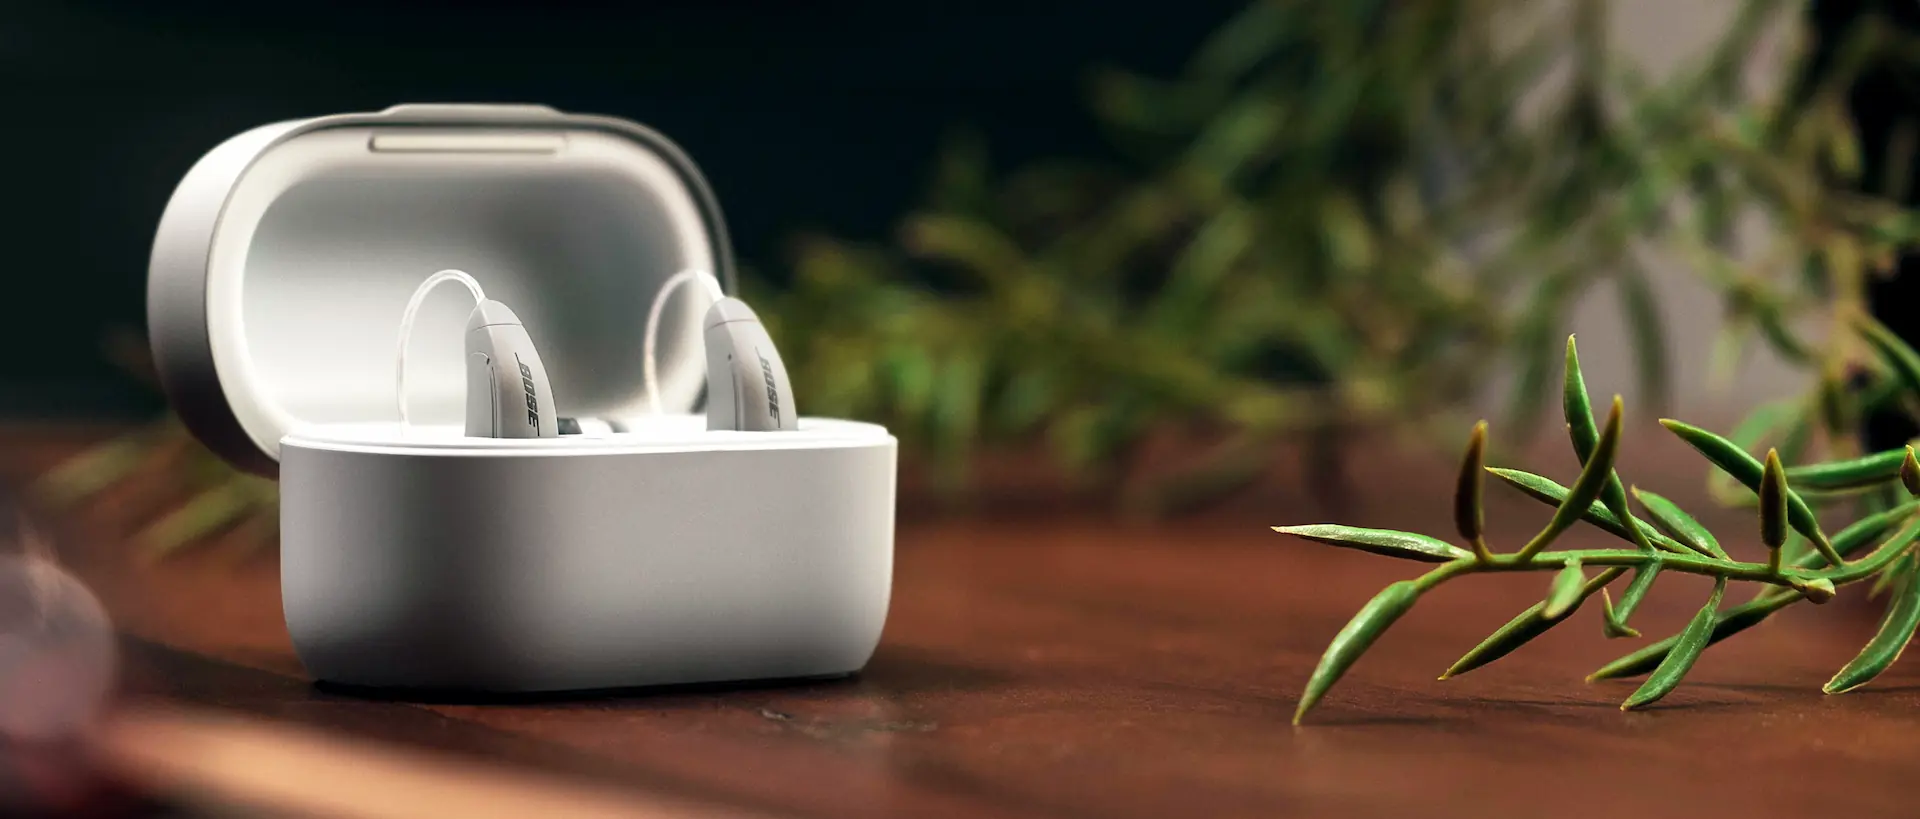 Desktop image of Lexie B2 Powered by Bose hearing aids on a table with herbs.